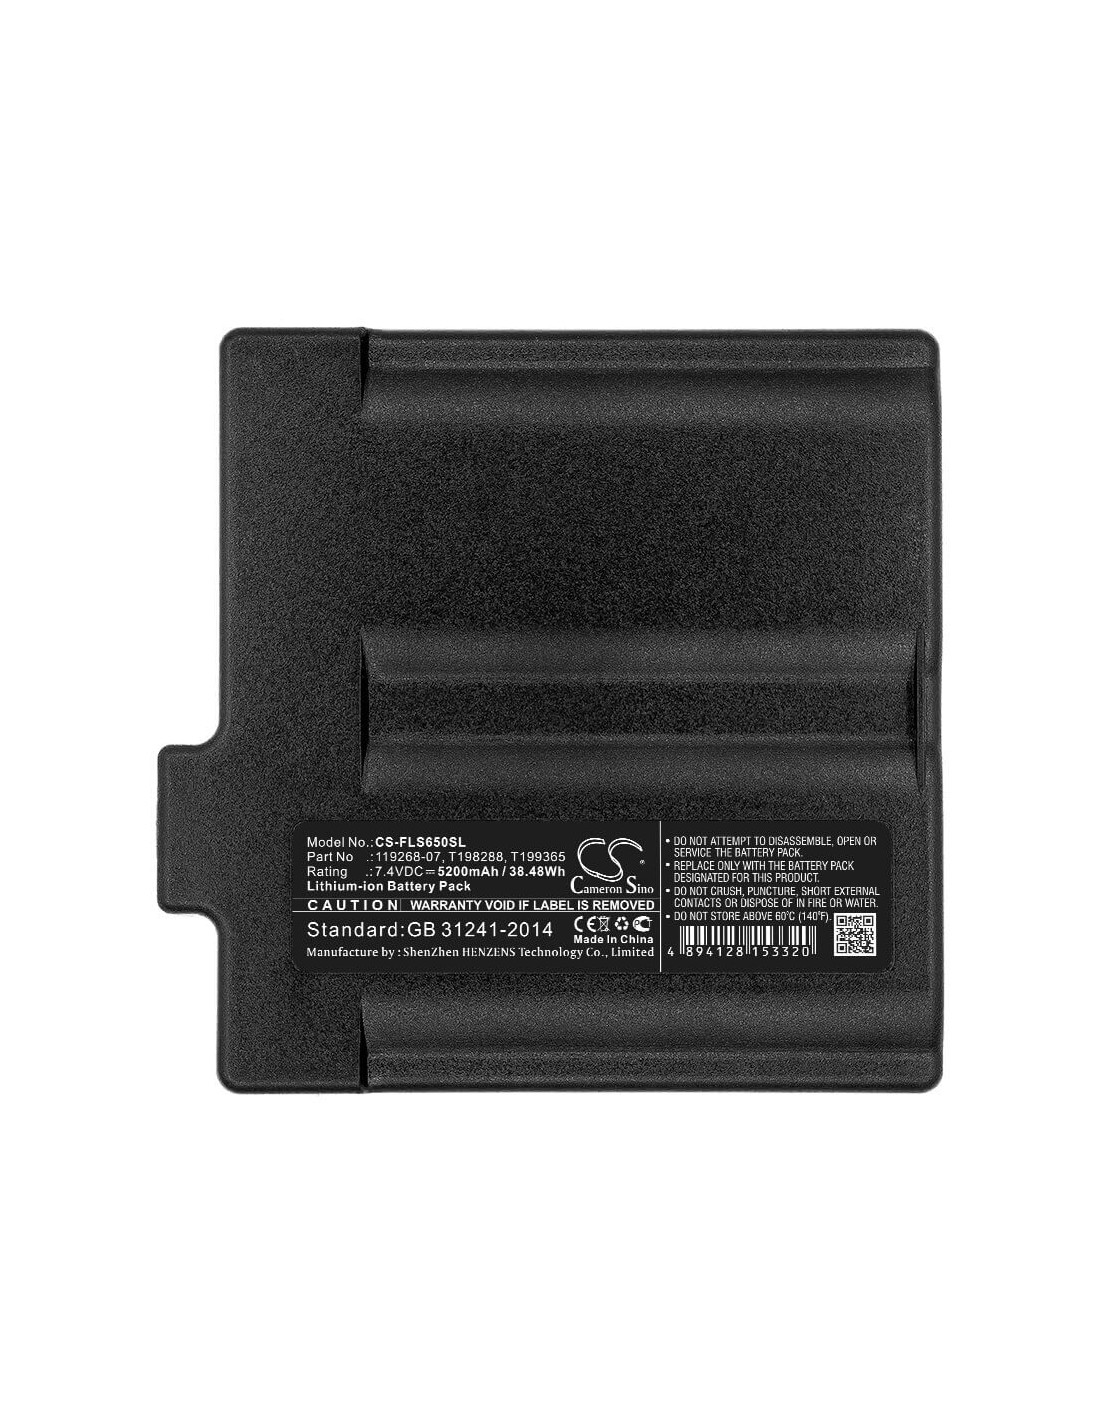 Battery for Flir, Division T199365acc, T199365acc, Thermacam B20 7.4V, 5200mAh - 38.48Wh